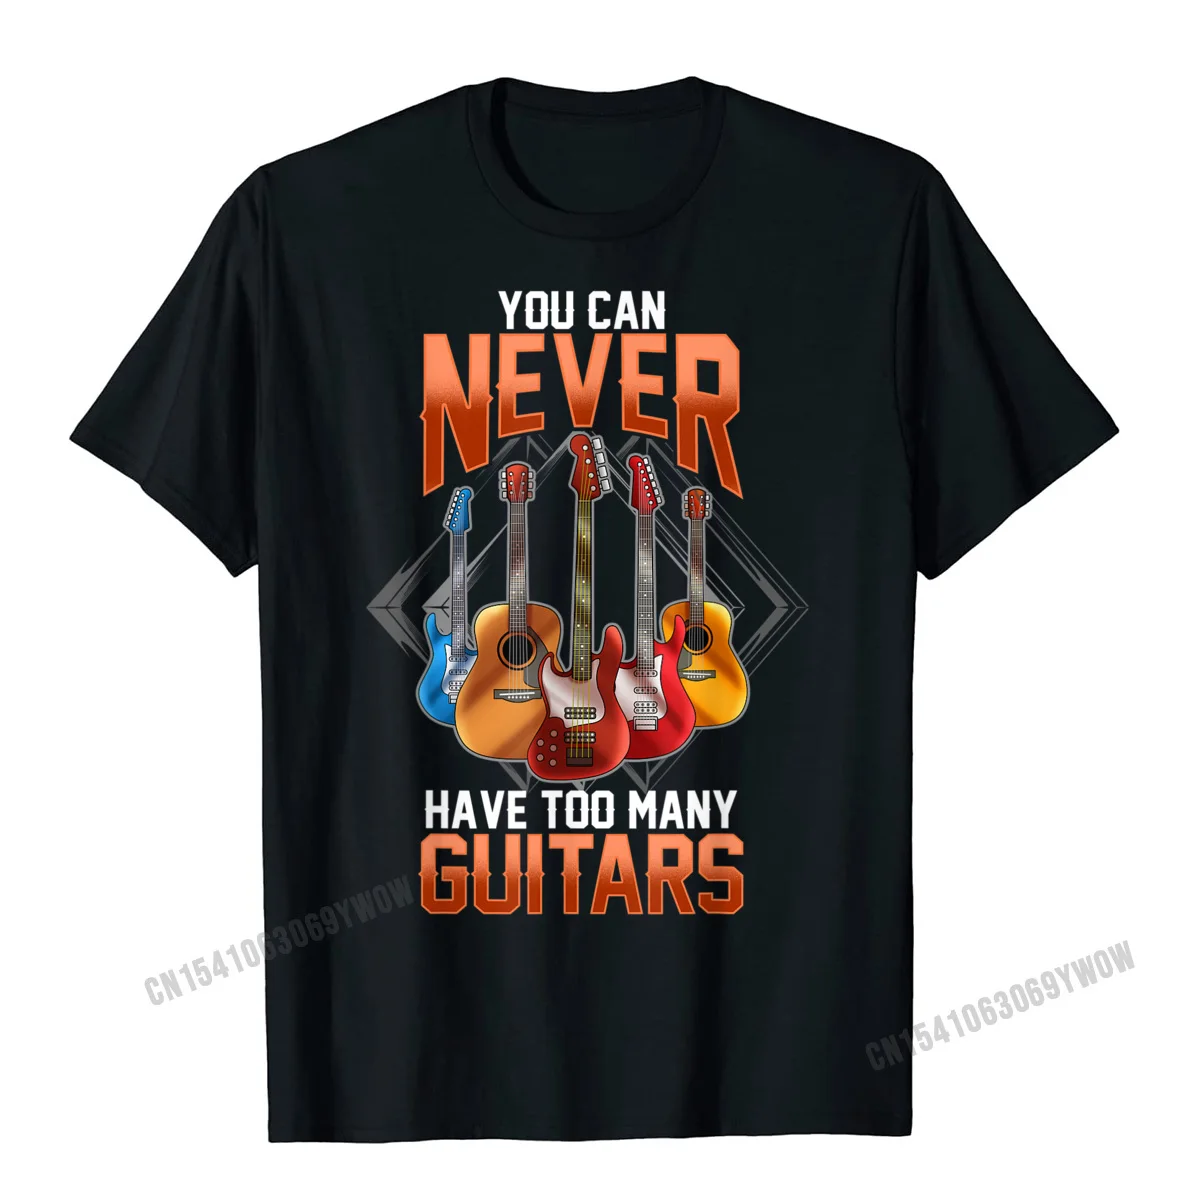 Guitar Shirts For Men You Can Never Have Too Many Guitars T-Shirt Printed Tshirts Funky Harajuku Cotton Customized Top T-Shirts